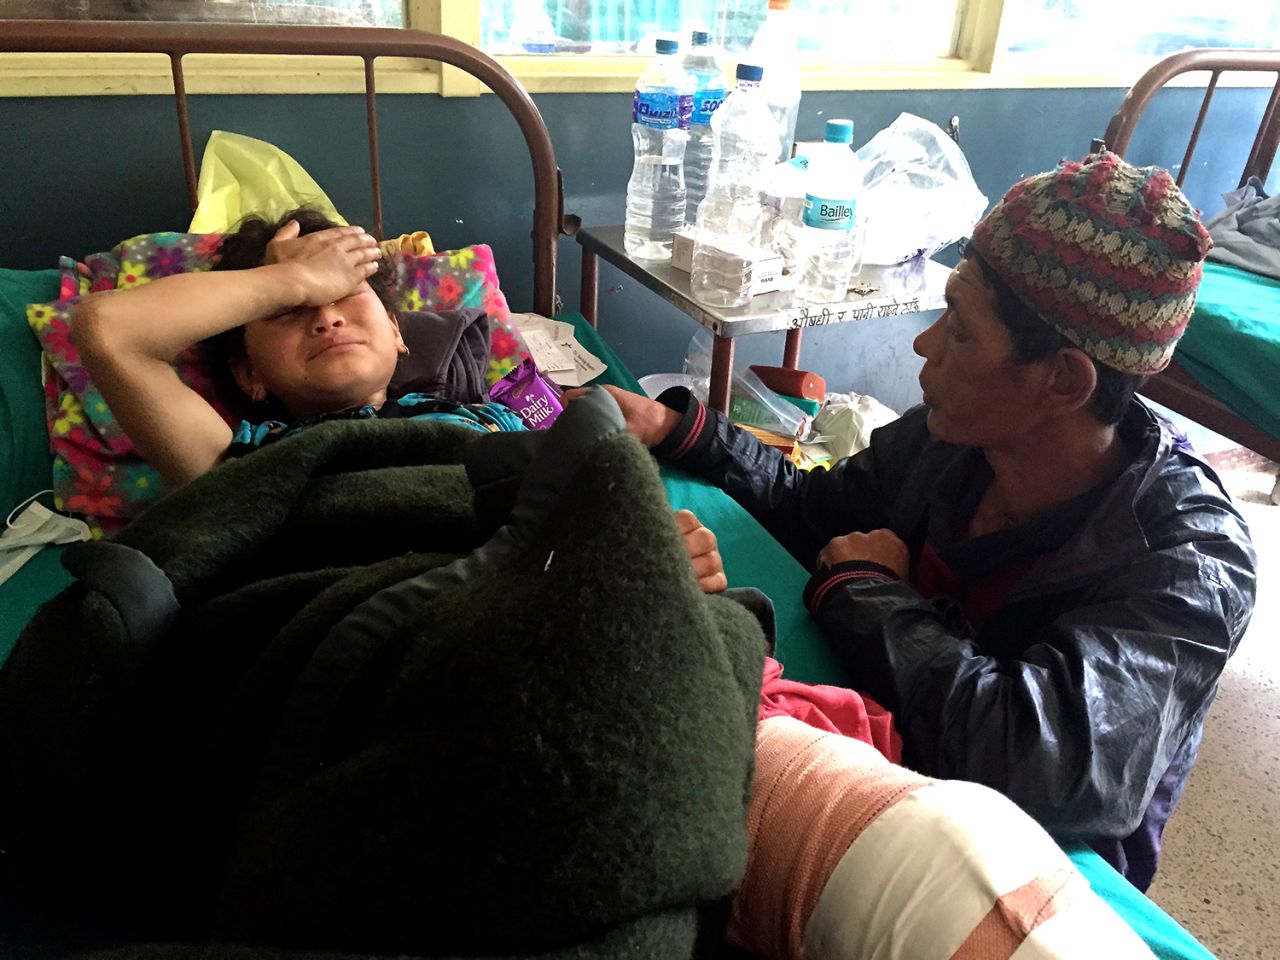 Bhim Bahadur Gurung tries to console his daughter, Maya, in her hospital bed in Kathmandu. He had to leave her during the trip from their village to make room in the rescue helicopter for other injured passengers.